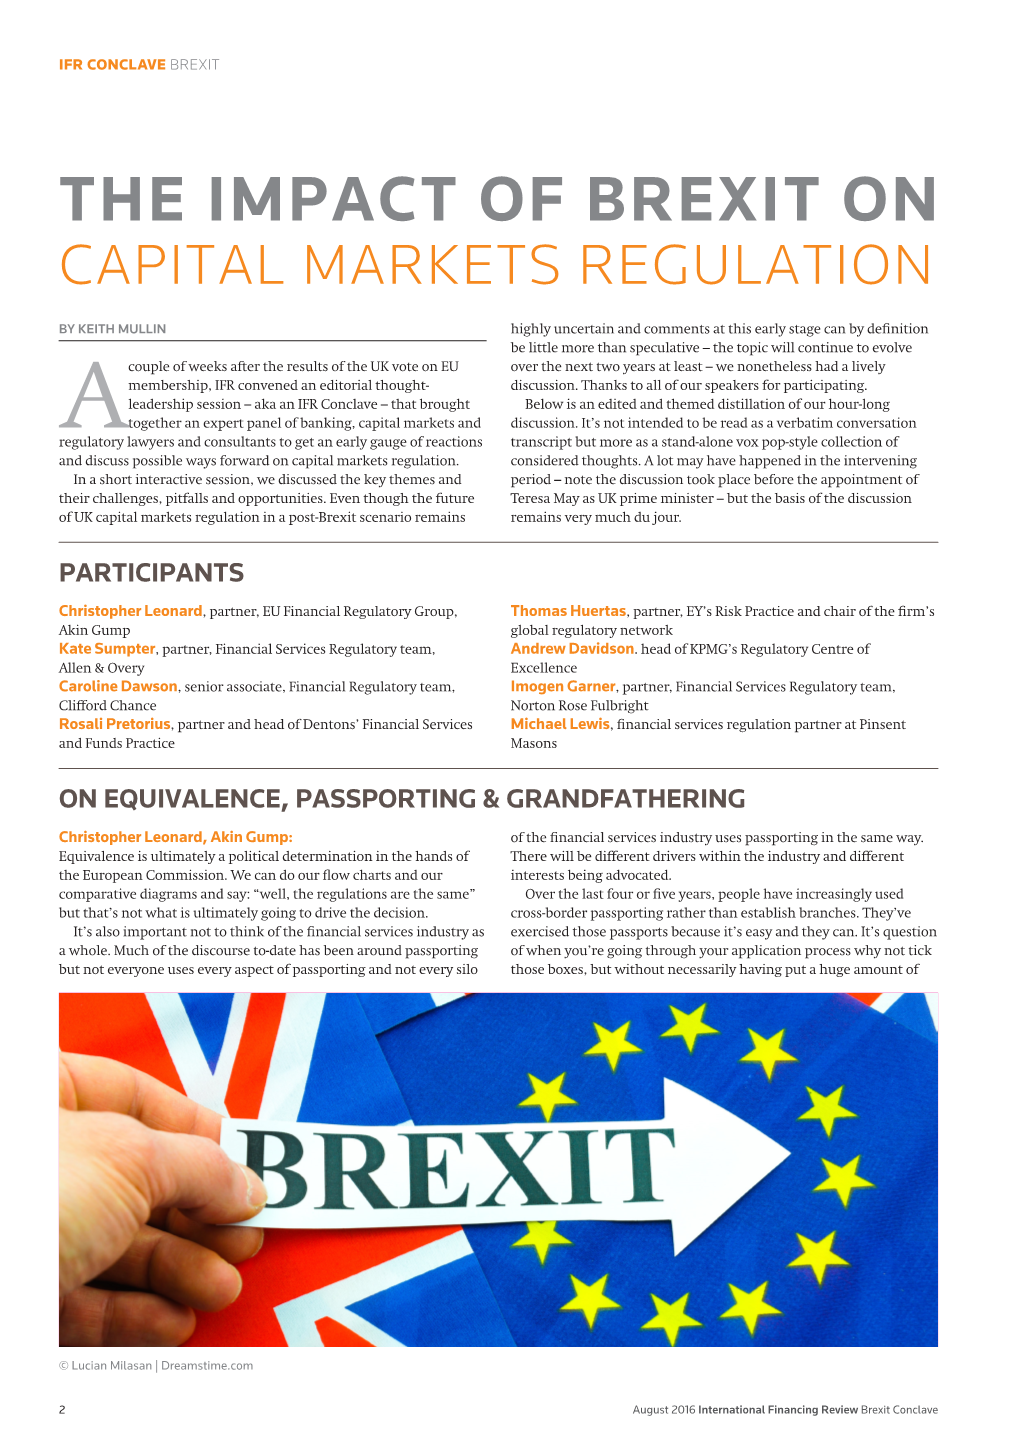 The Impact of Brexit on Capital Markets Regulation